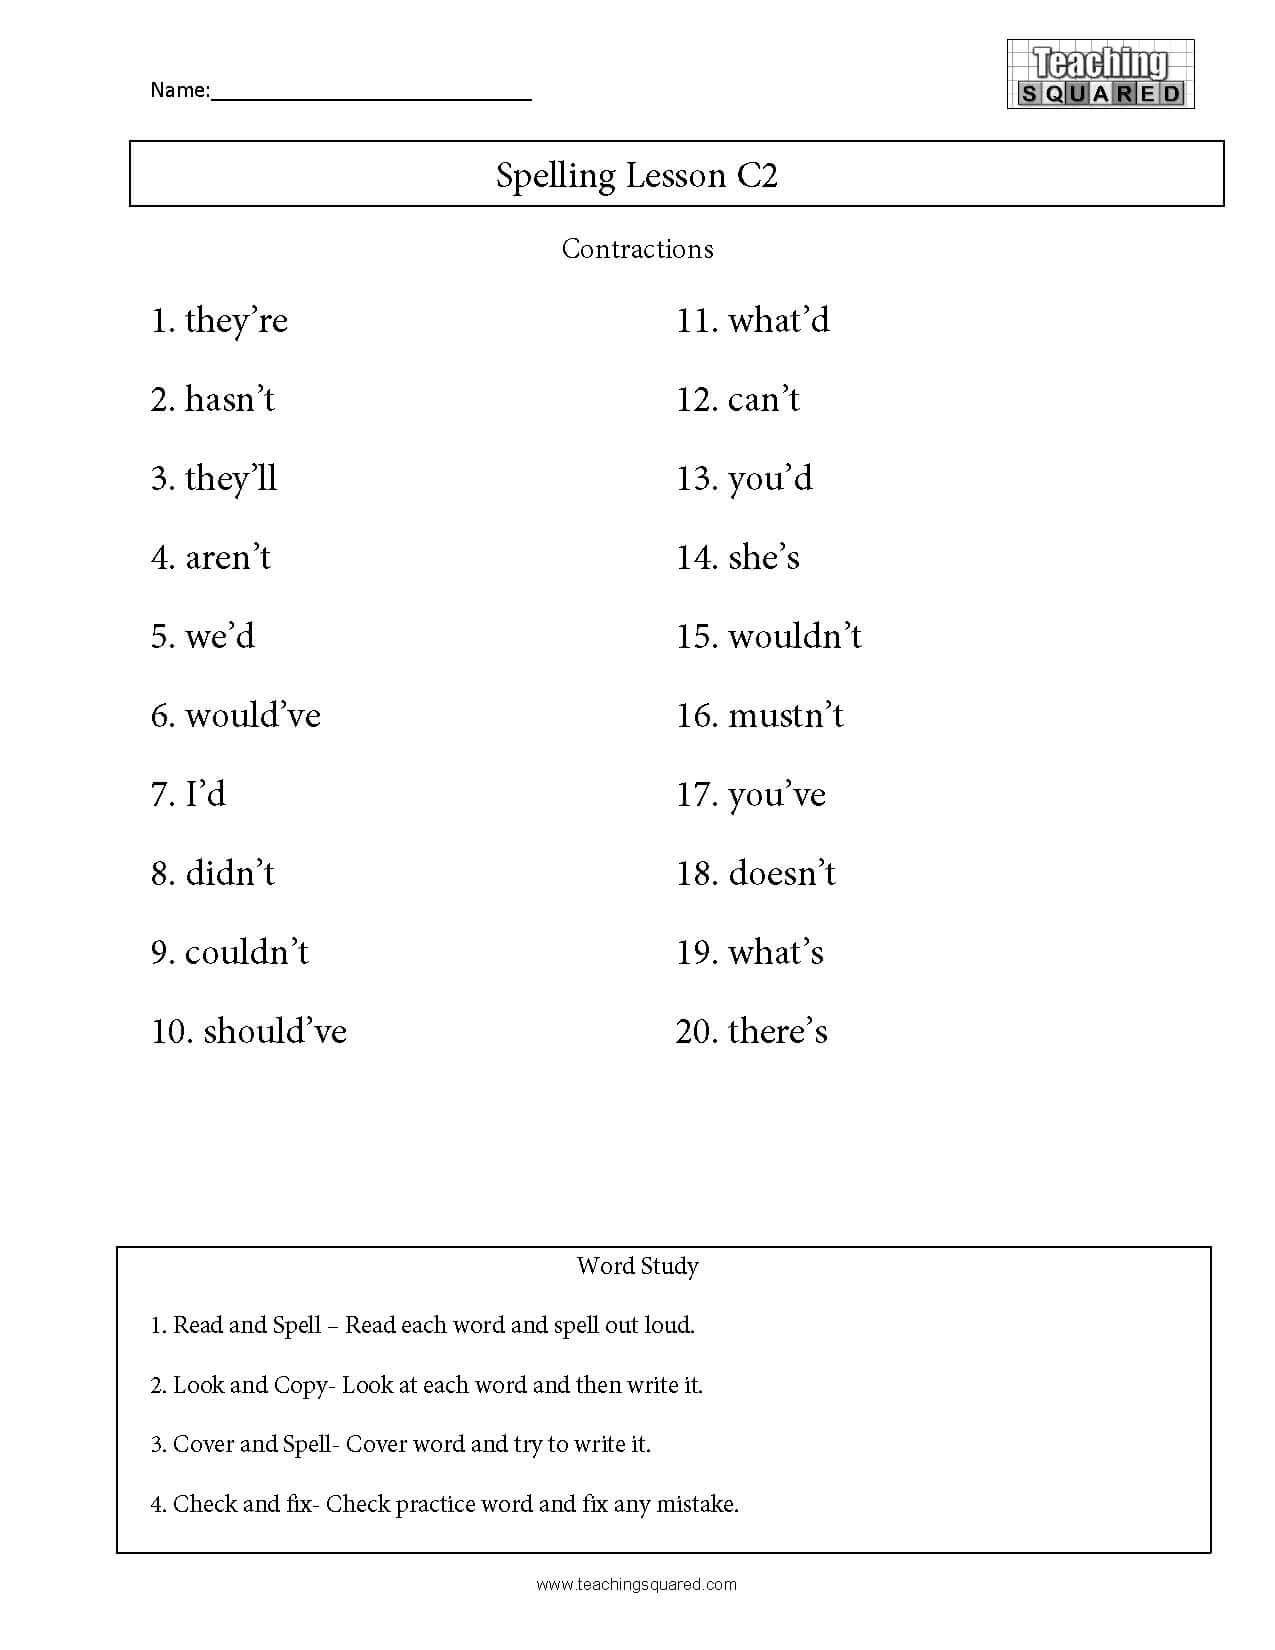 Spelling List C21- Contractions - Teaching Squared For Contractions Worksheet 3rd Grade